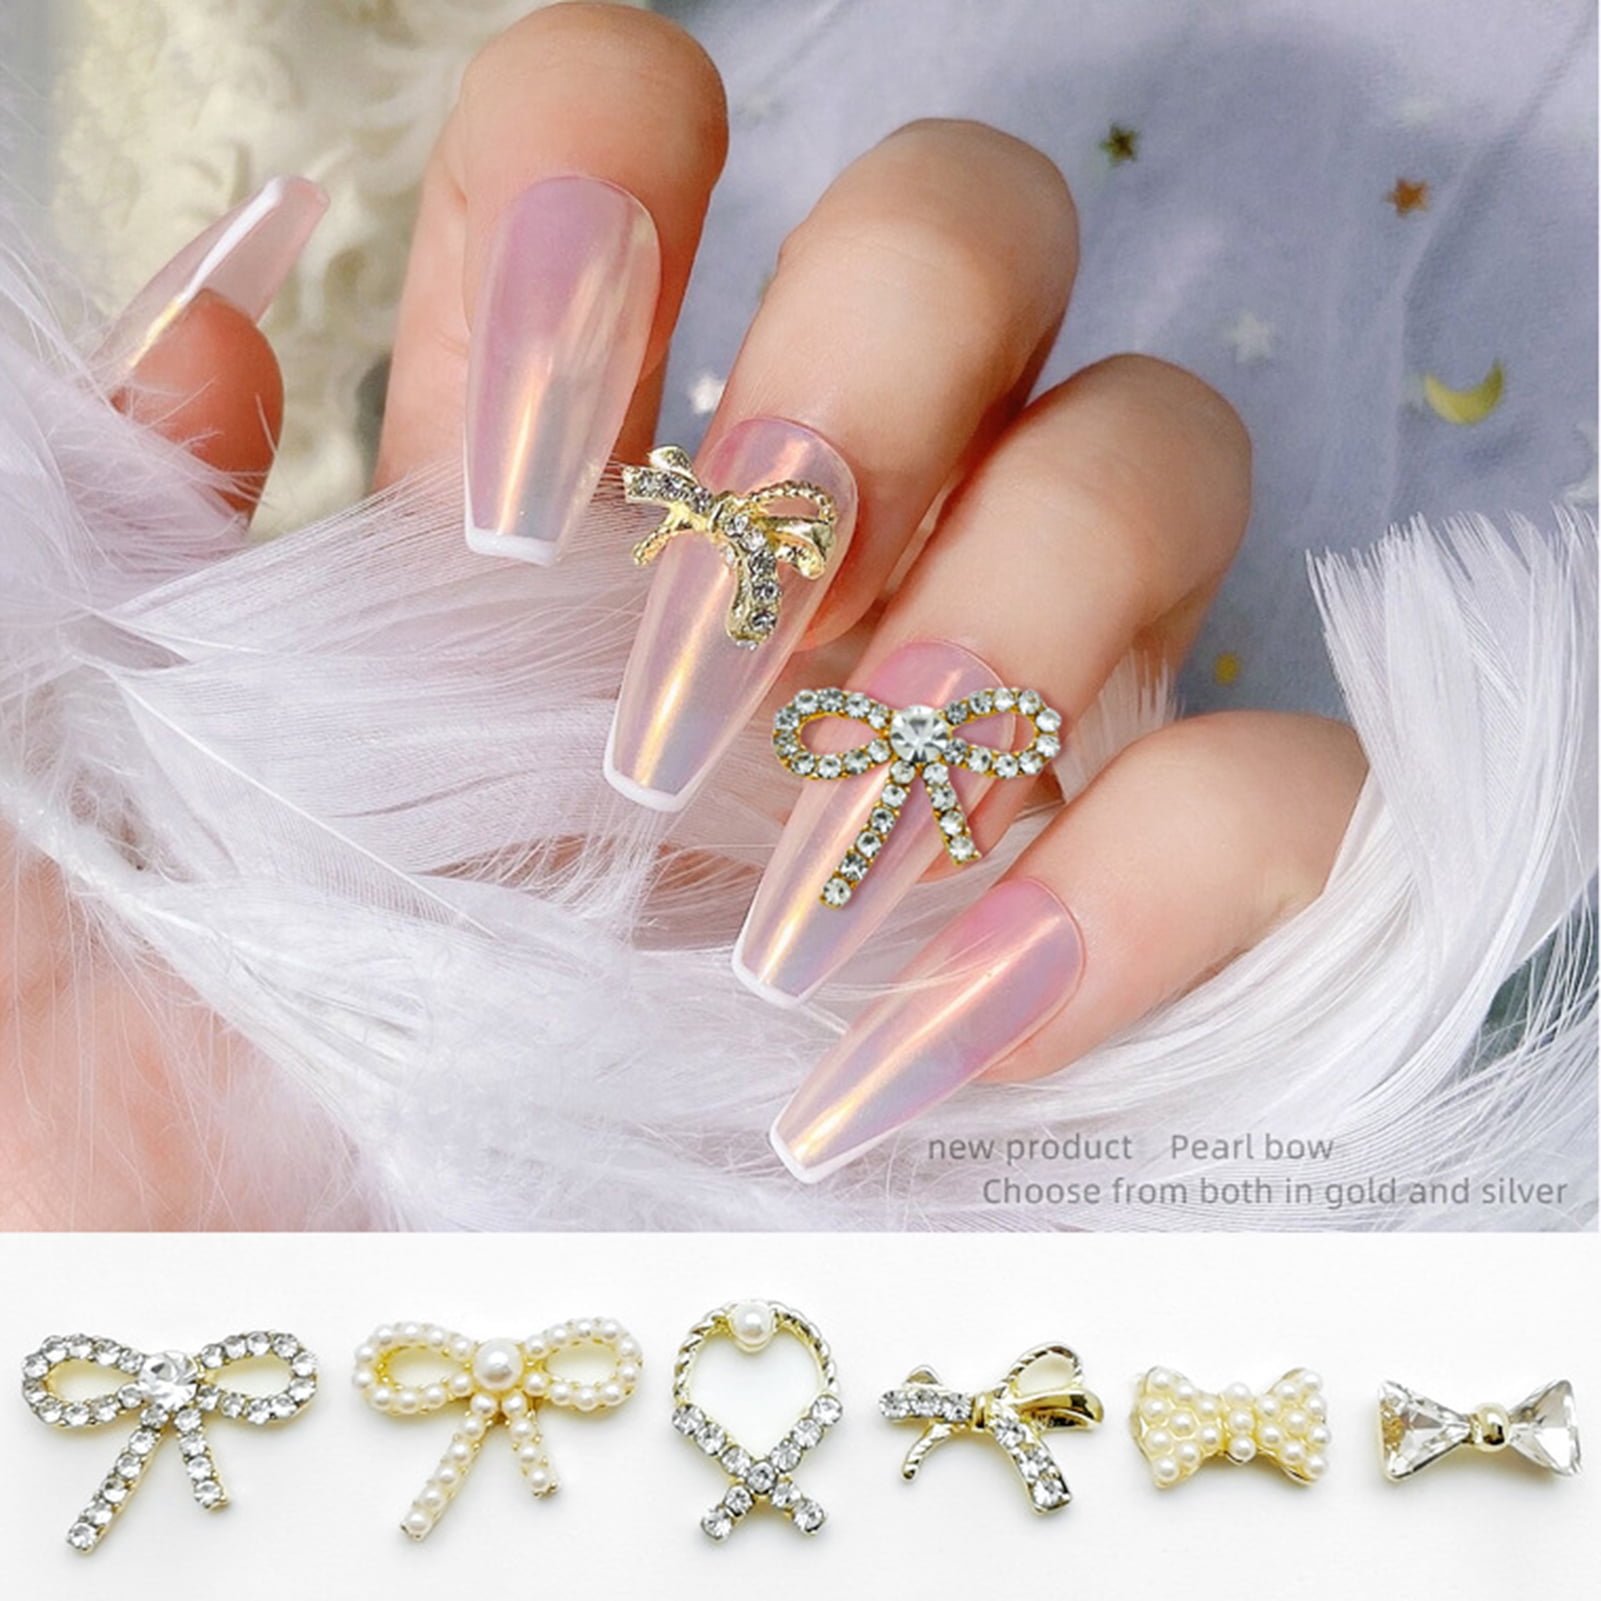 Kripyery 10Pcs Nail Art Jewelries 3D Bow Shape Rhinestones Sparkling Faux  Pearls Nail Charms Decoration for Nail Salon 